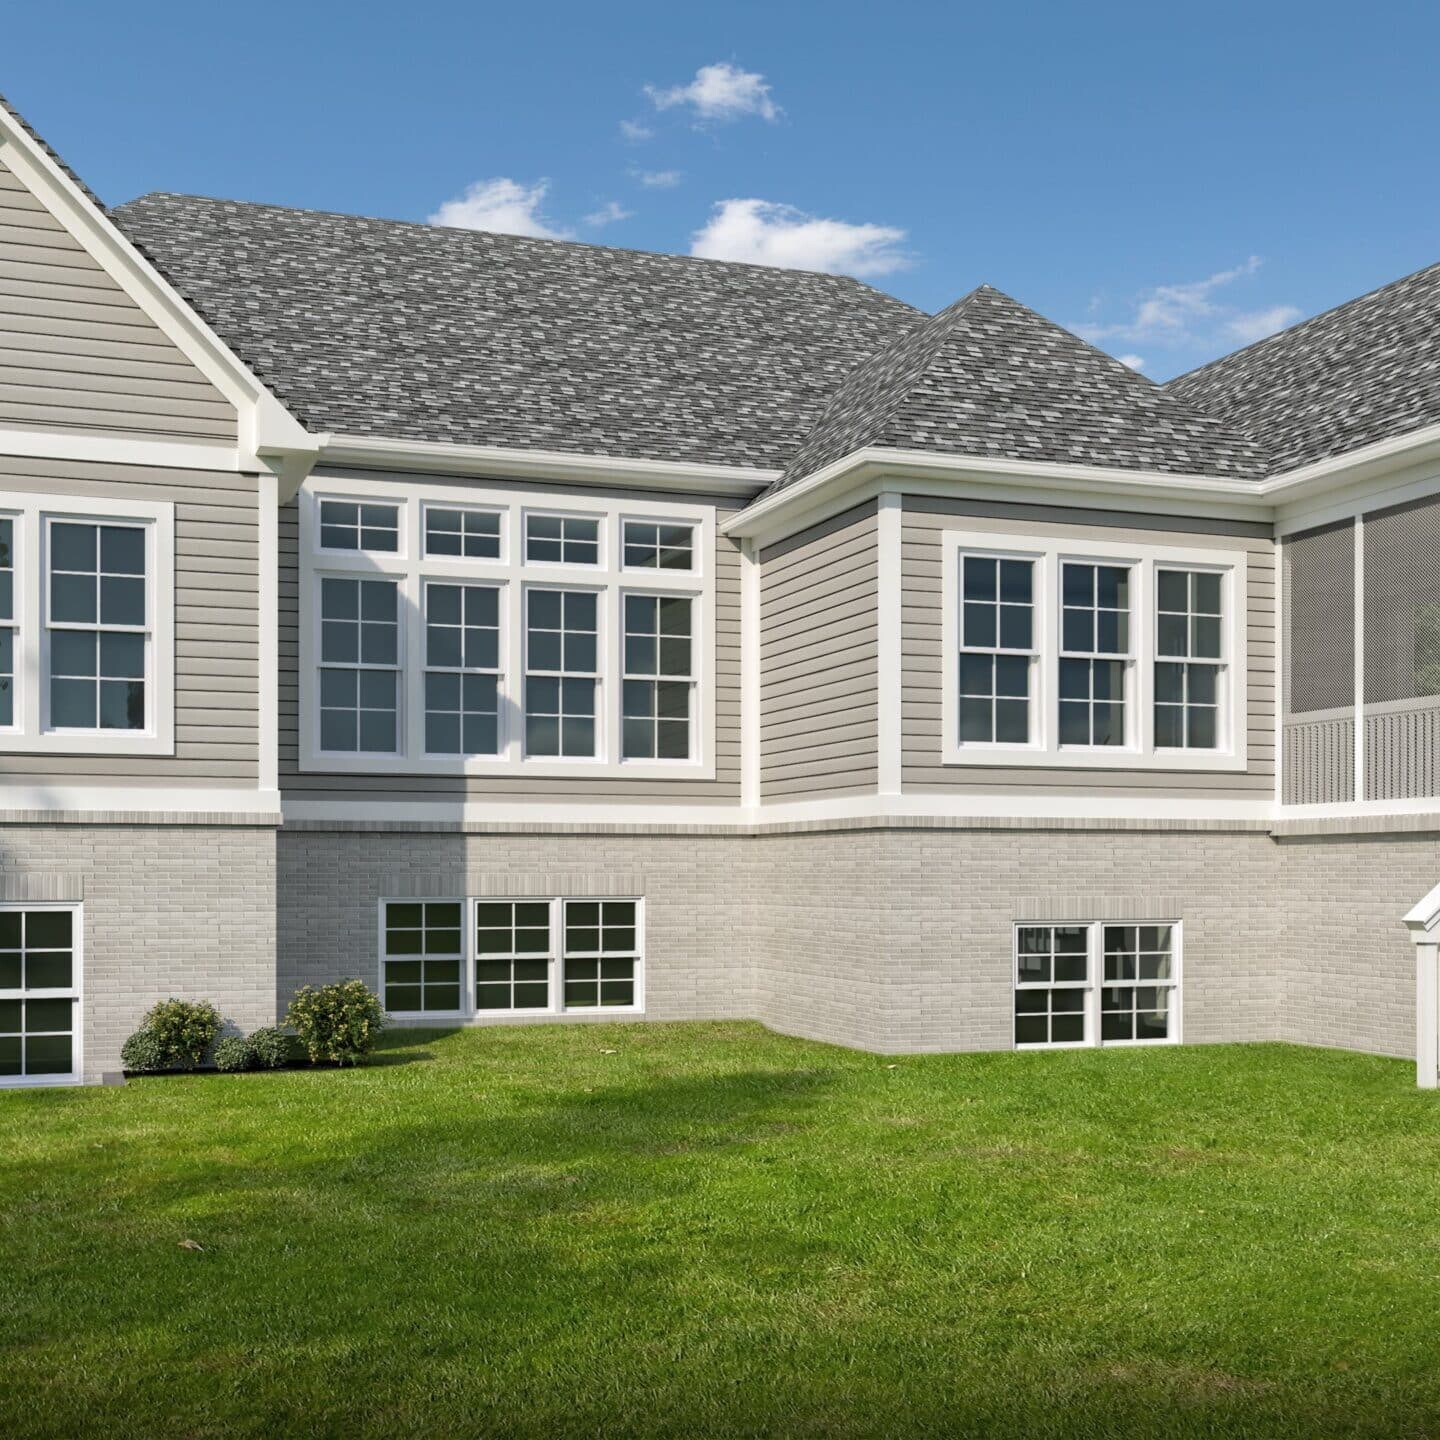 A rendering of a new home with a porch and steps, designed by a custom home builder in Carmel Indiana.